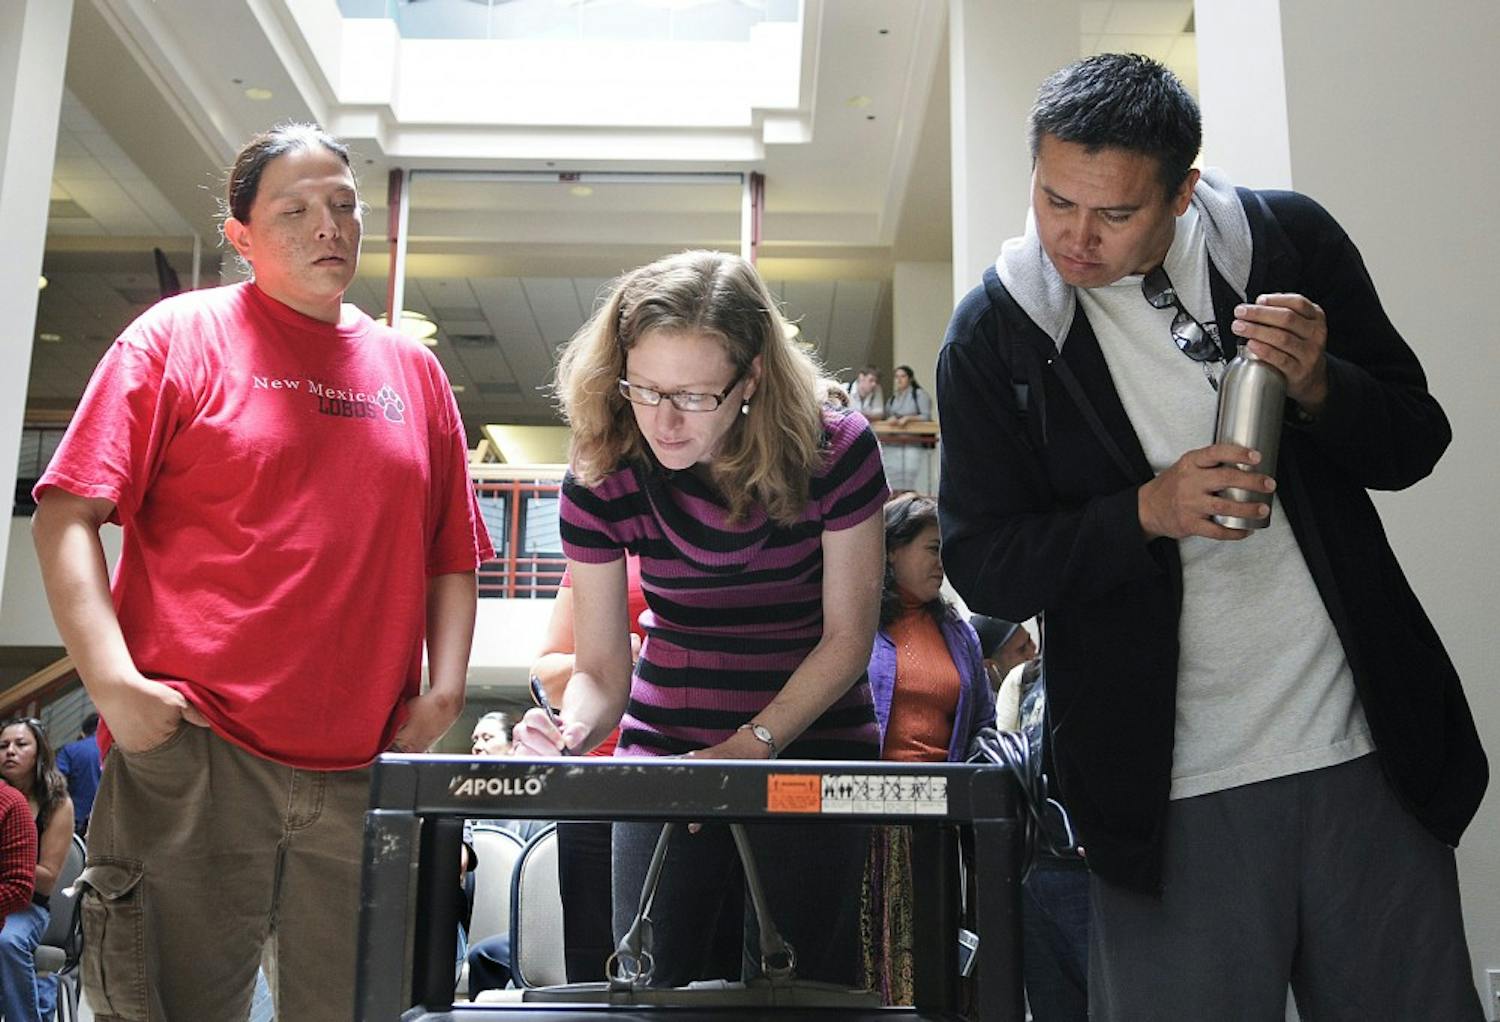 	Assistant Professor Kathleen Washburn, center, signs a petition at the SUB on Monday encouraging UNM to recognize Indigenous Day as a holiday instead of Columbus Day. Mario Atencio, left, and Russell Grey also signed the petition, which had about 60 signatures.